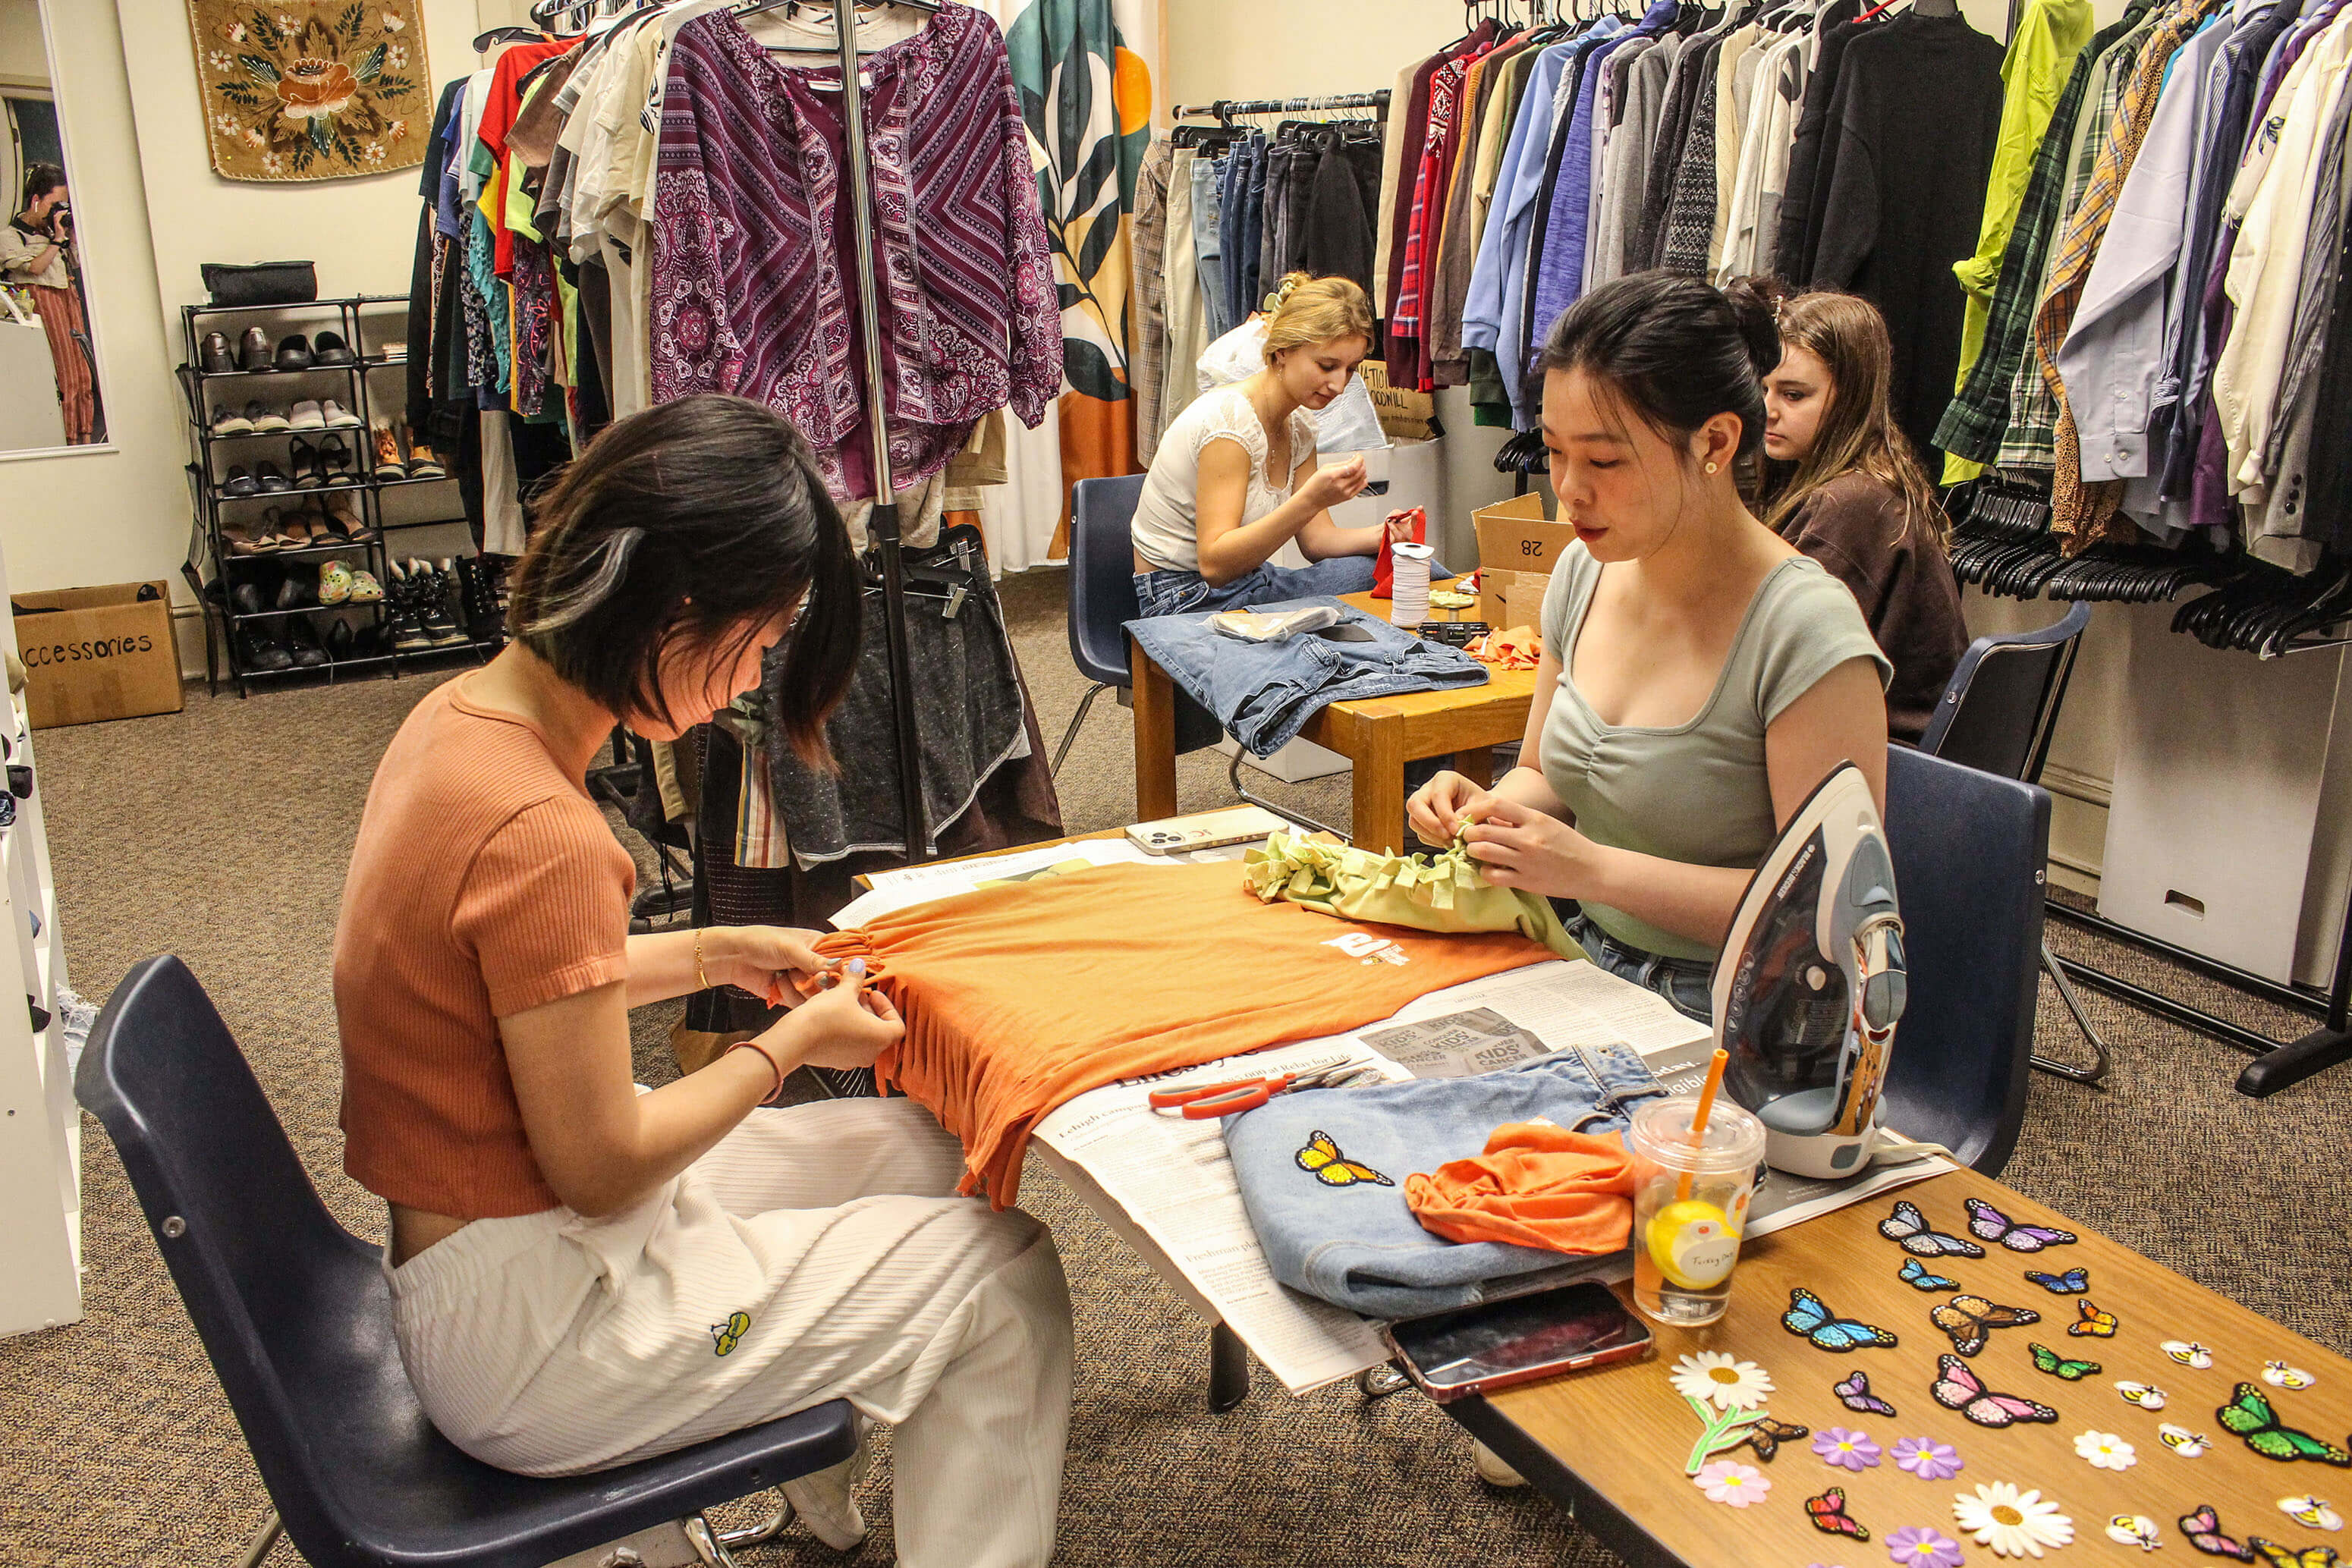 Two students sit at a table to alter thrifted clothes into new, upcycled items by making alterations and adding colorful patches